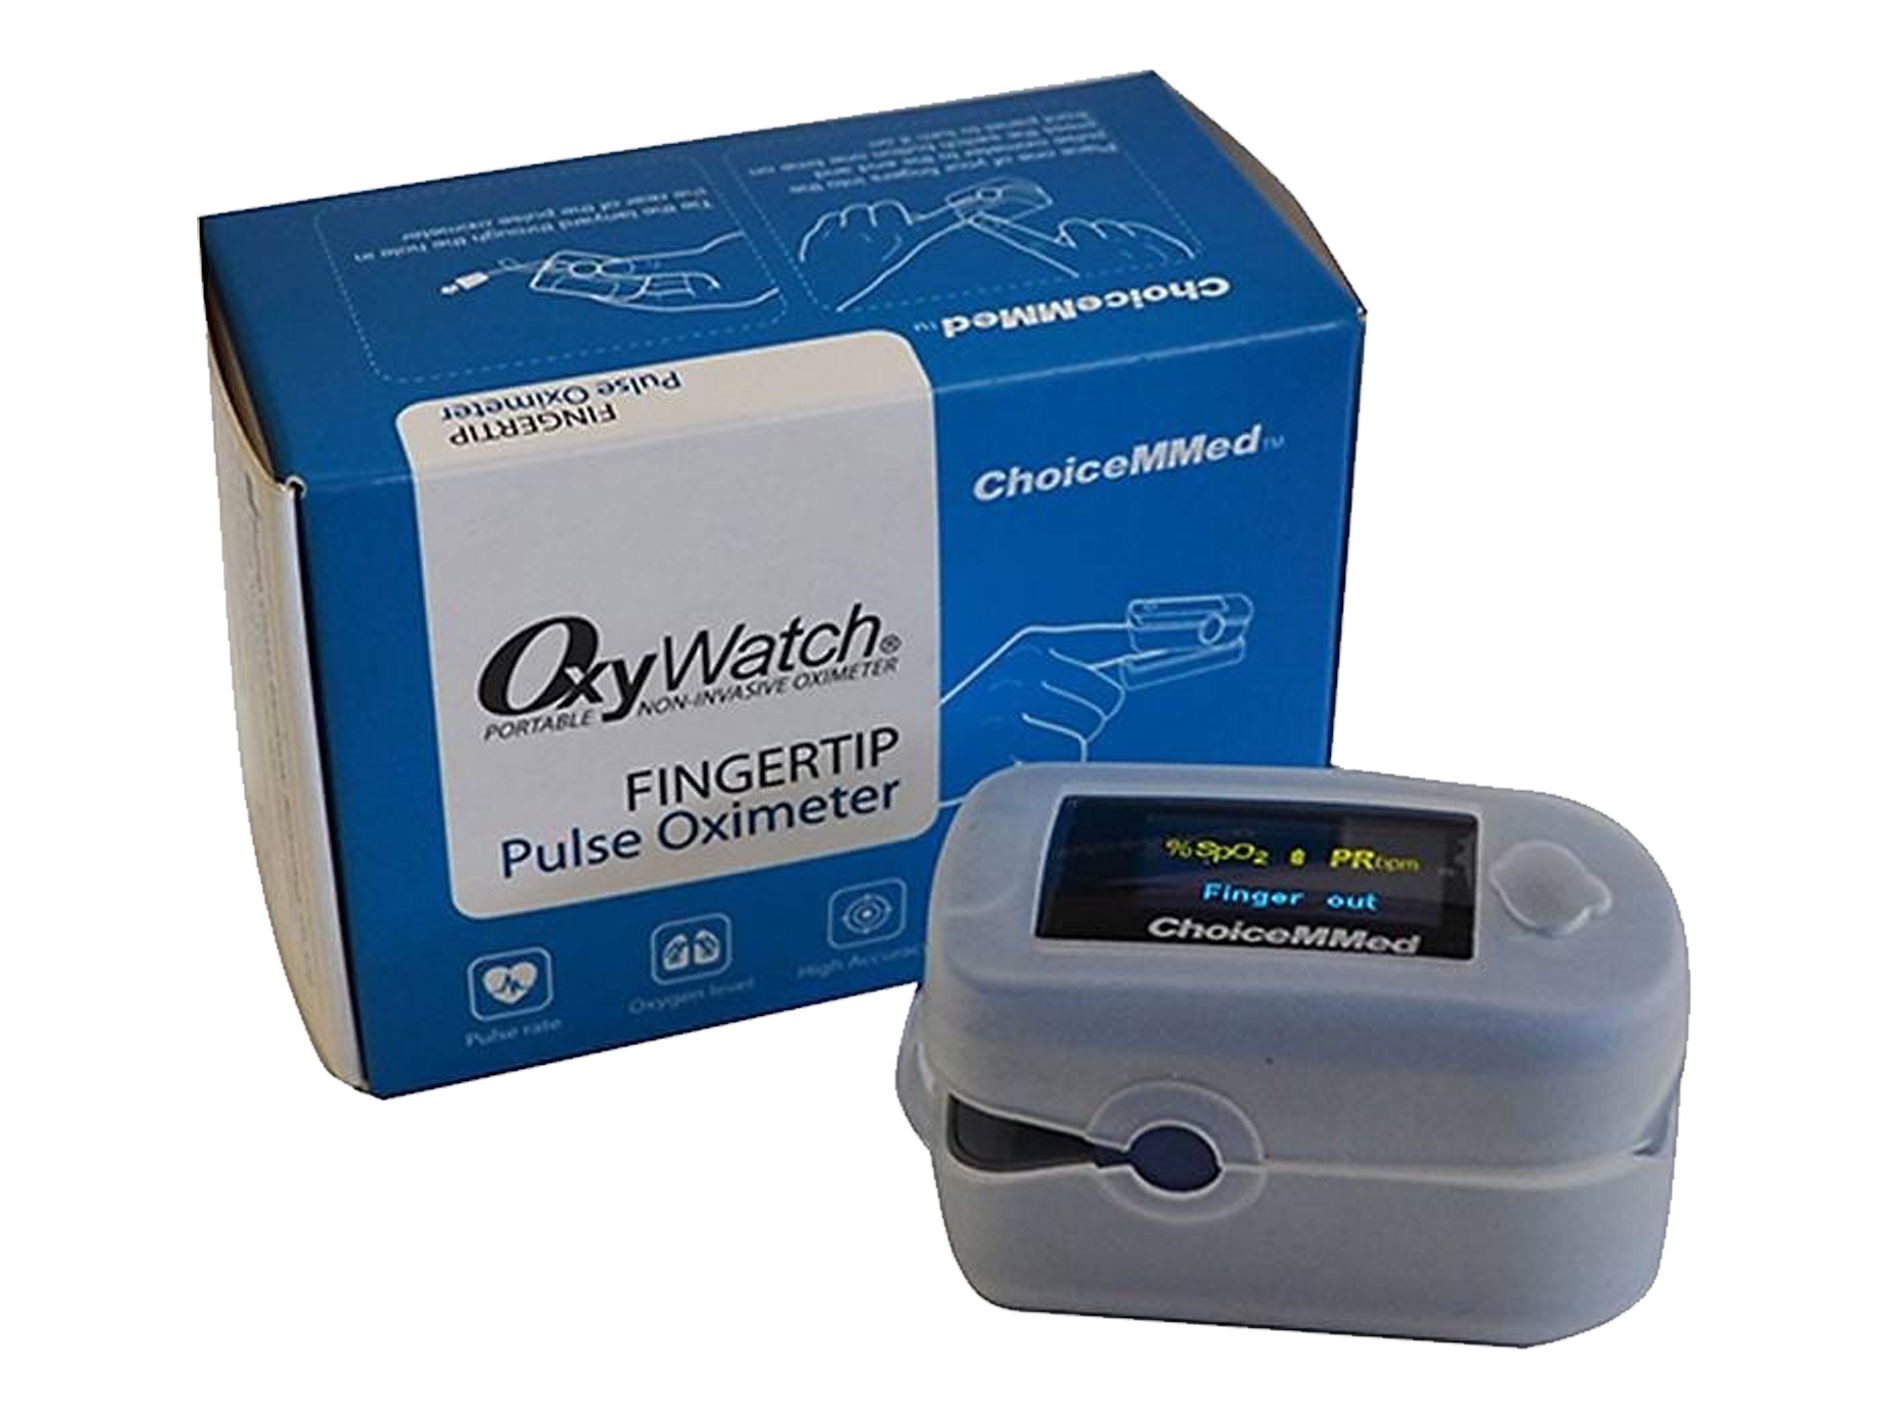 choicemmed md300w1 oximeter .dat file